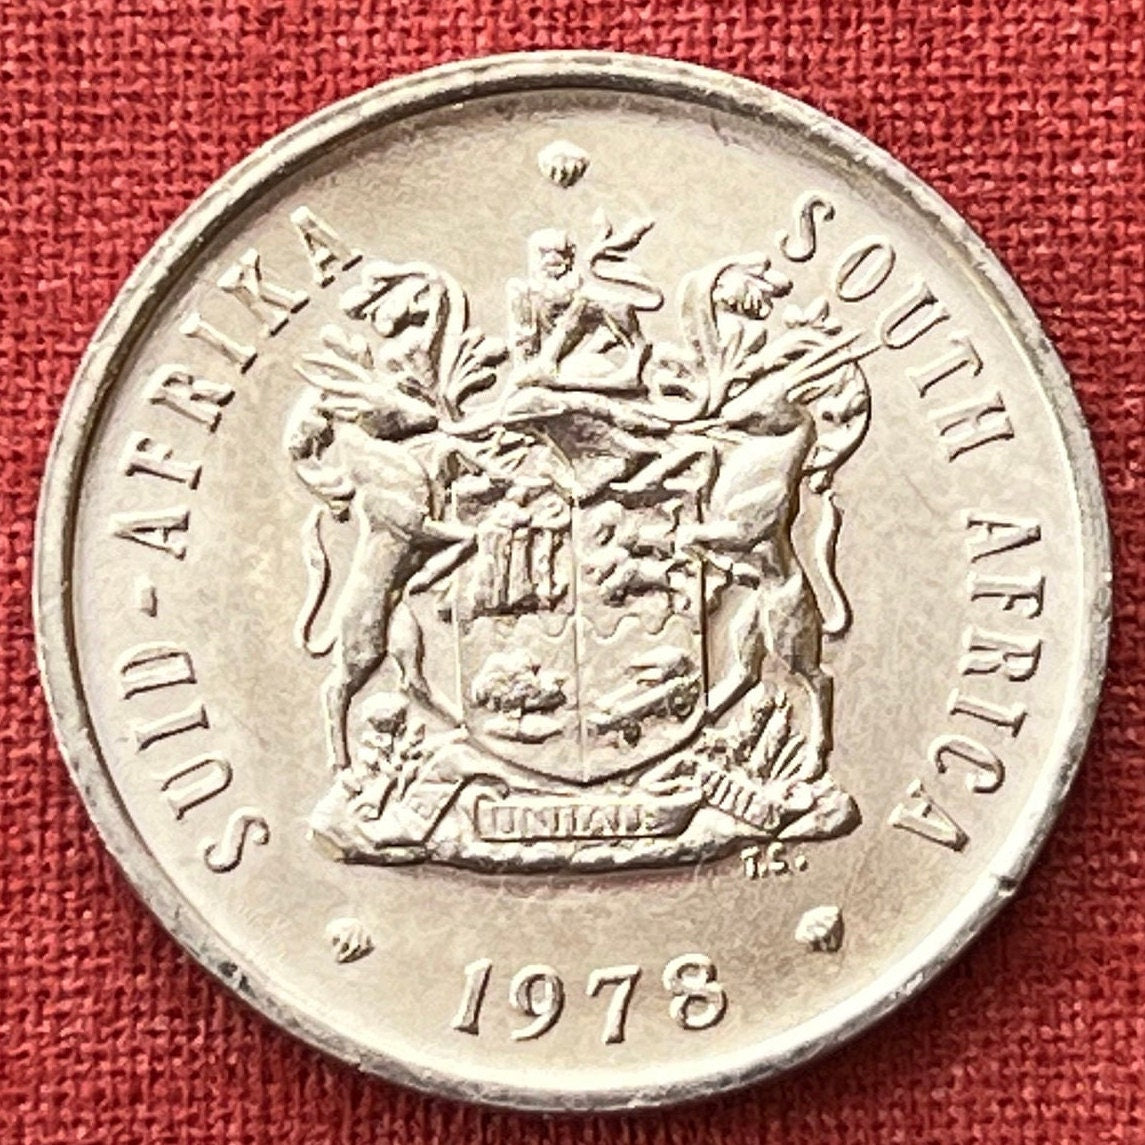 King Sugar Bush 20 Cents South Africa Authentic Coin Money for Jewelry and Craft Making (King Protea) (Power Through Unity)